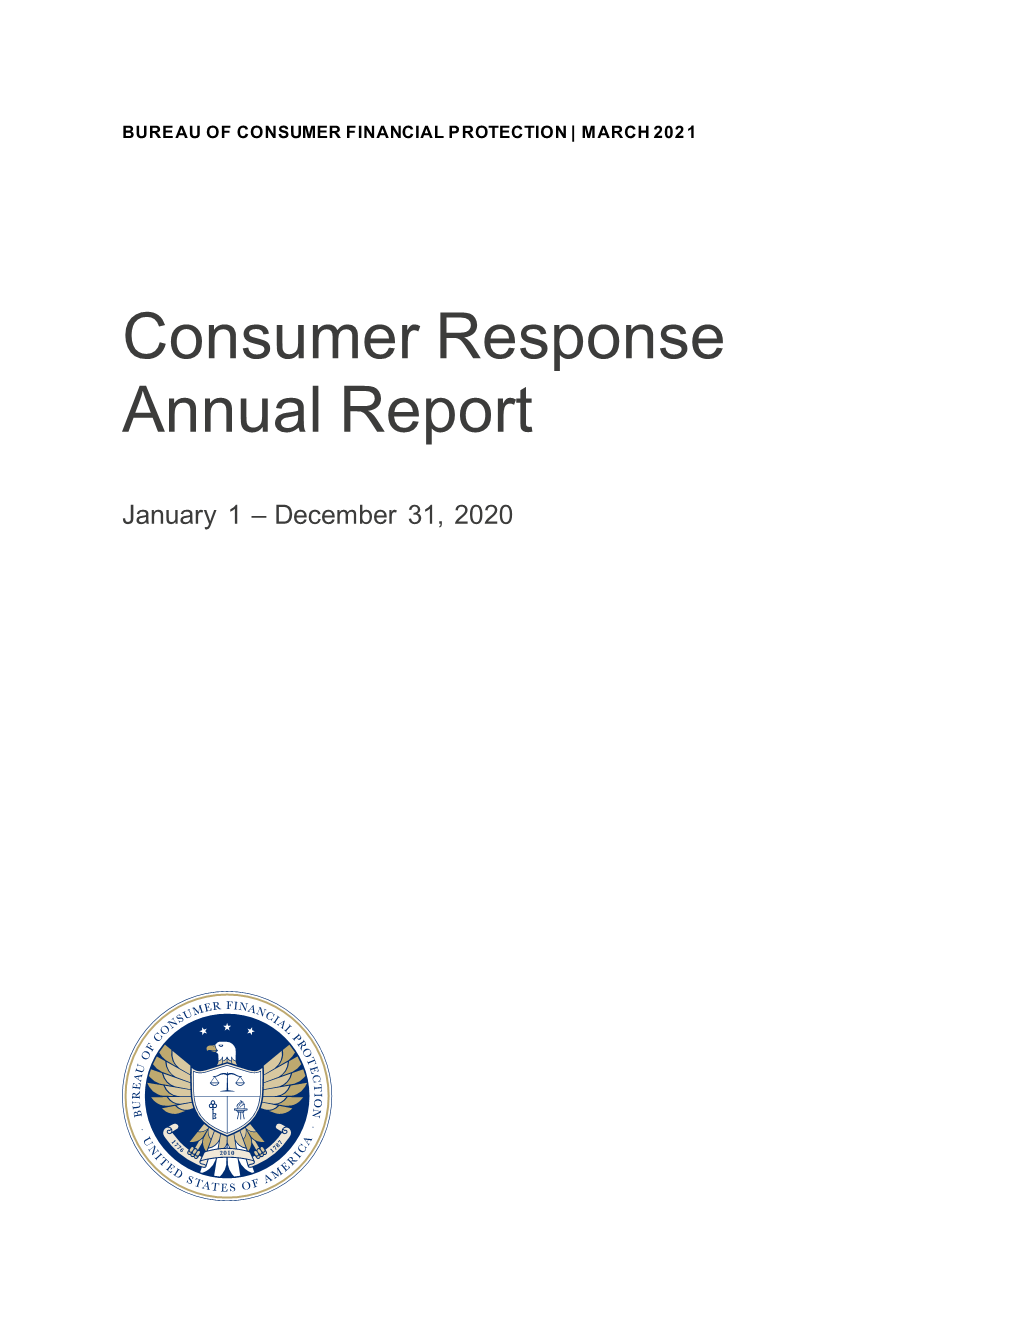 Consumer Response Annual Report for 2020